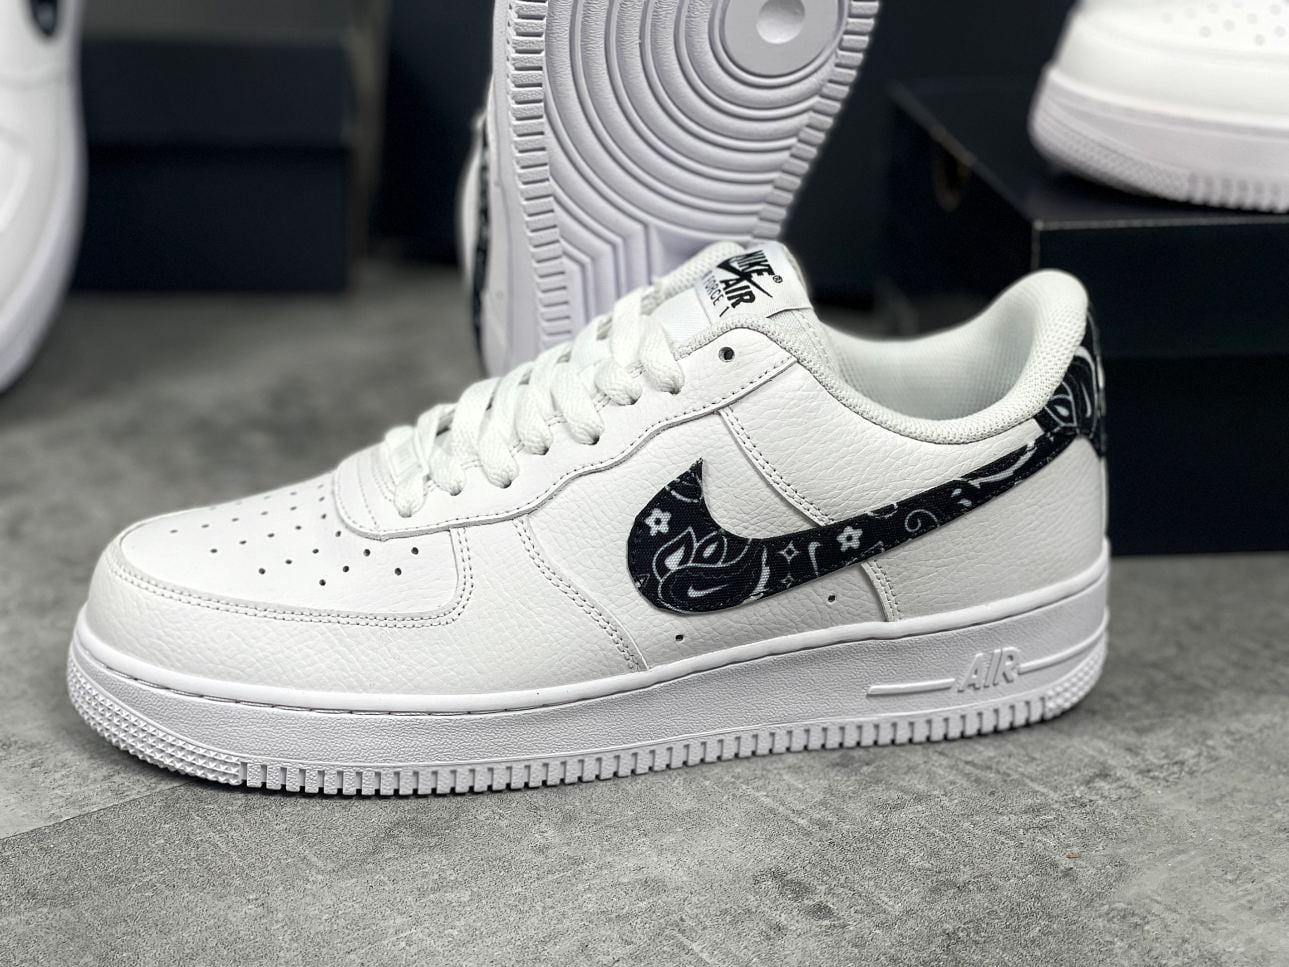 Giày Nike Air Force 1 '07 Essentials 'Black Paisley' Rep 1:1 - Roll Sneaker